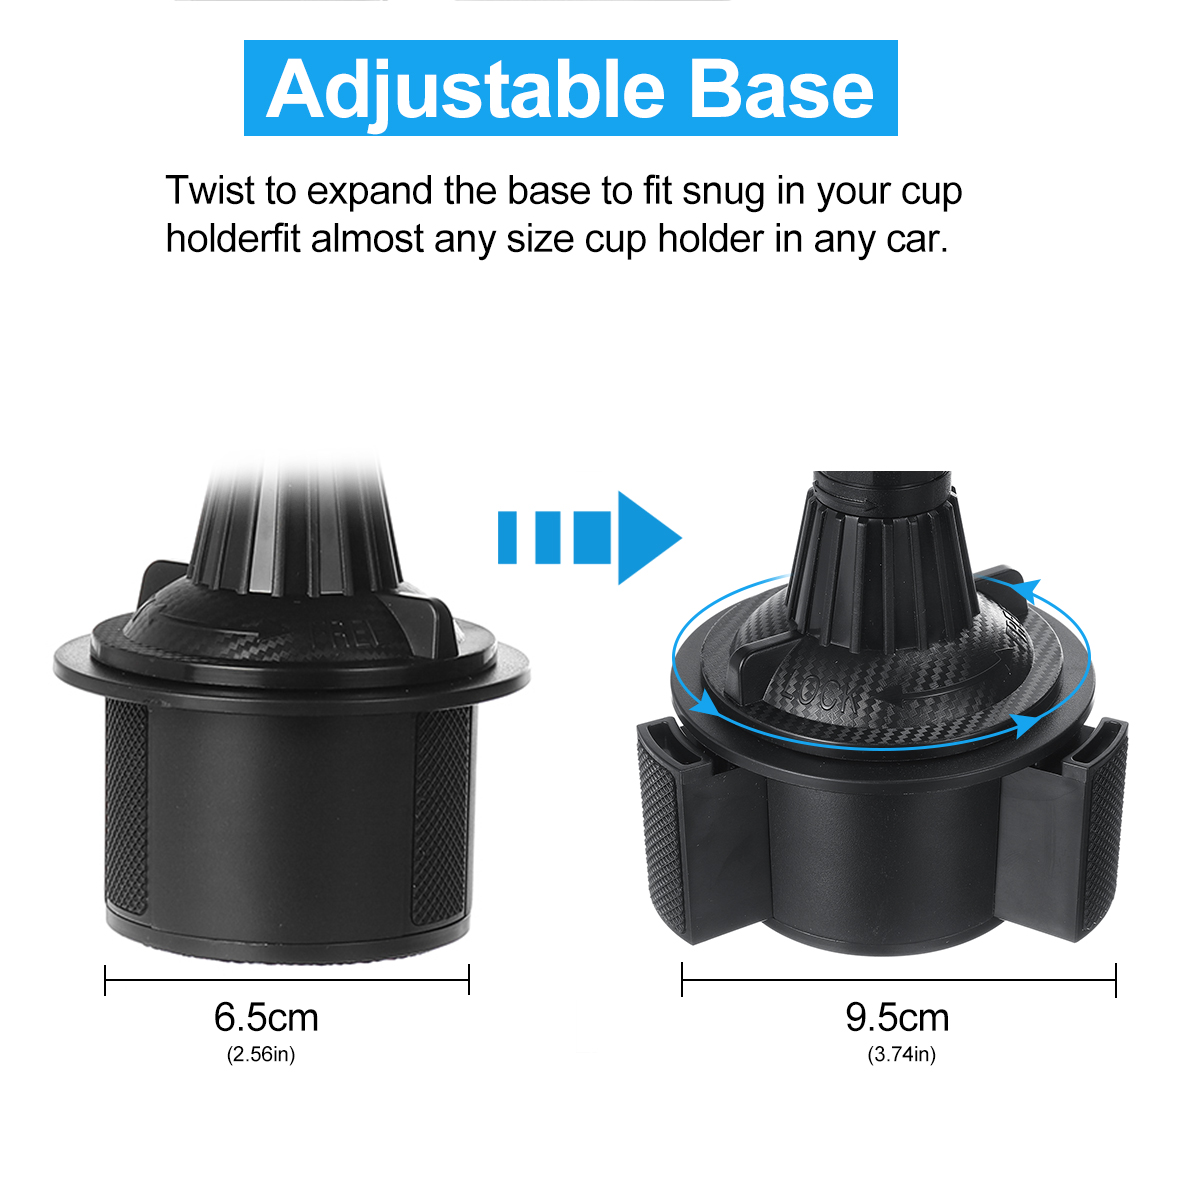 Bakeey-Car-Mount-360deg-Adjustable-Cup-Holder-Cradle-for-iPhone-12-for-Samsung-Galaxy-Note-20-ultra--1778684-6